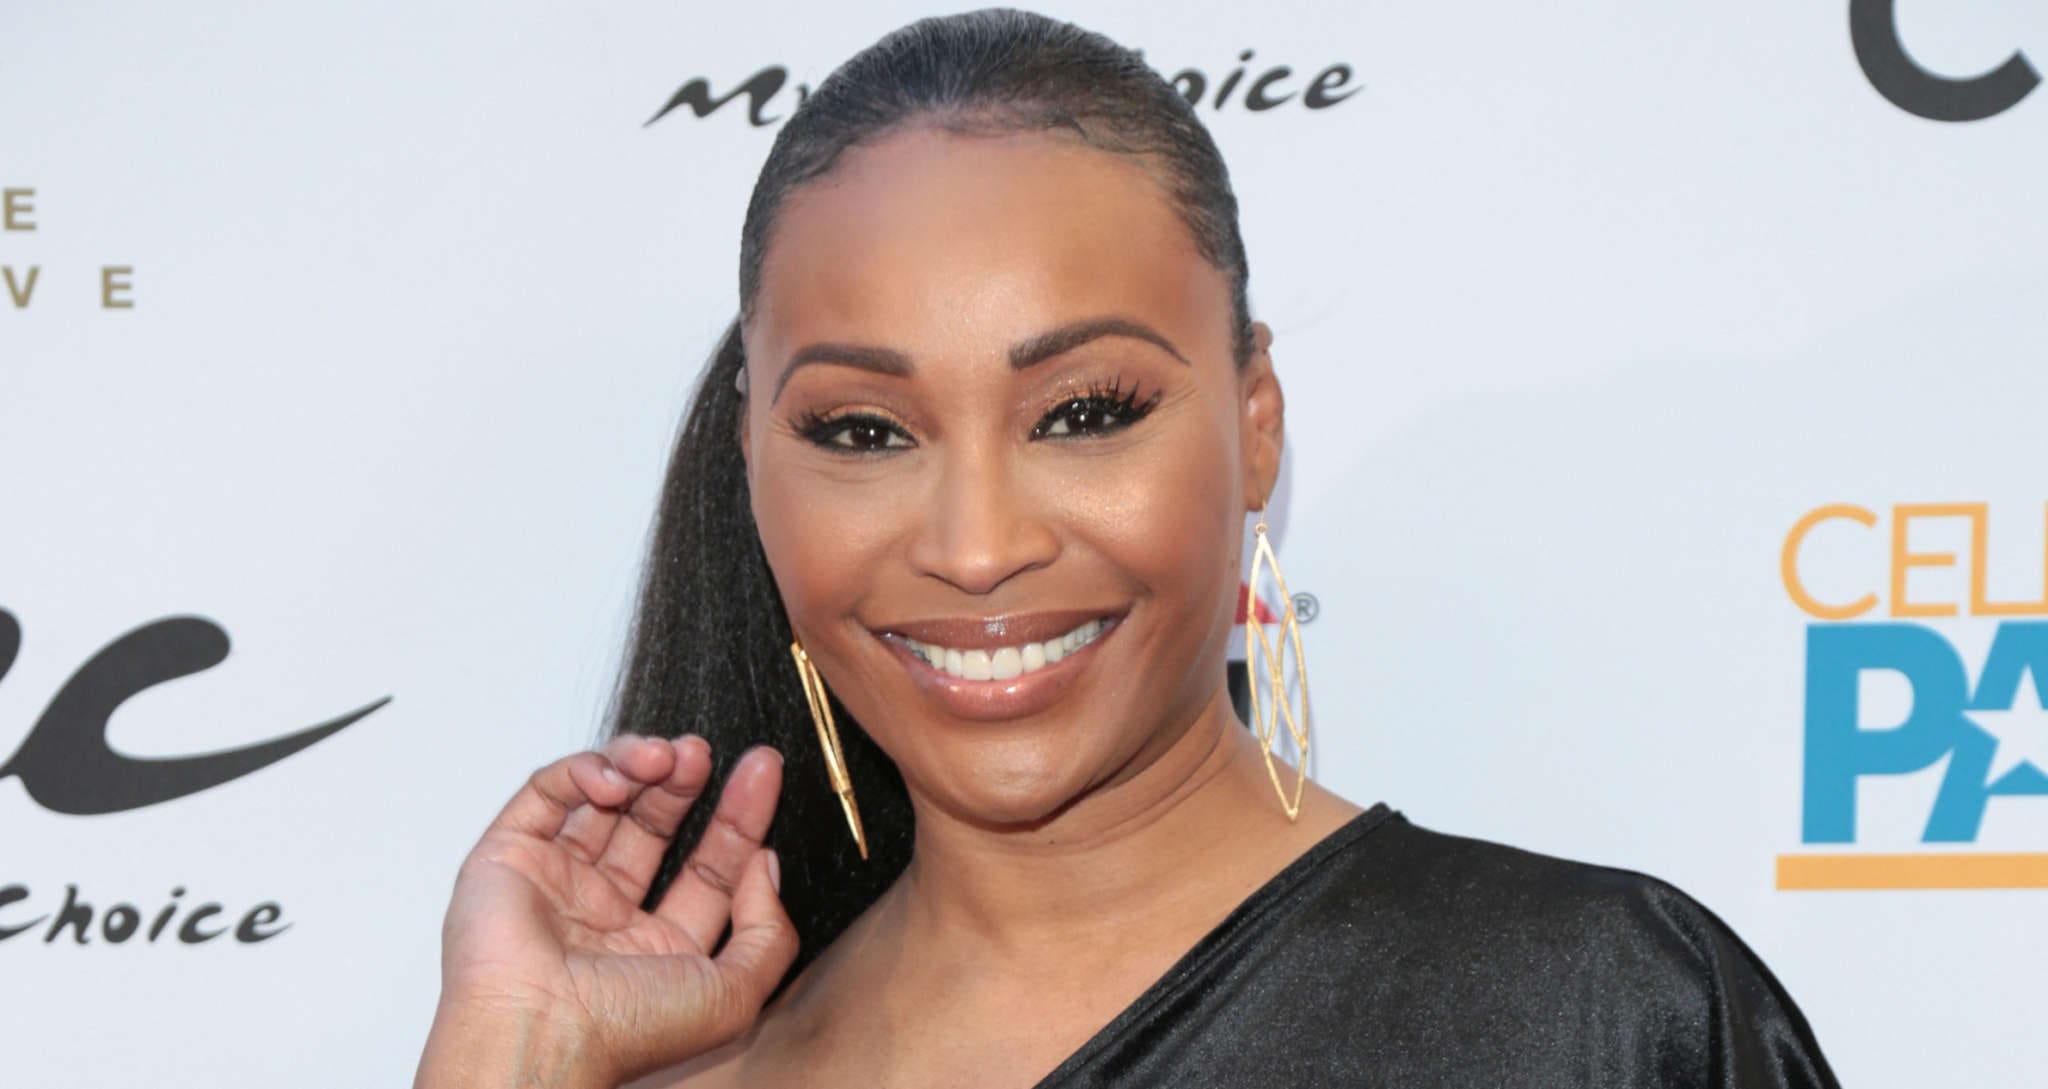 ”cynthia-bailey-says-breonna-taylor-did-not-die-in-vain”